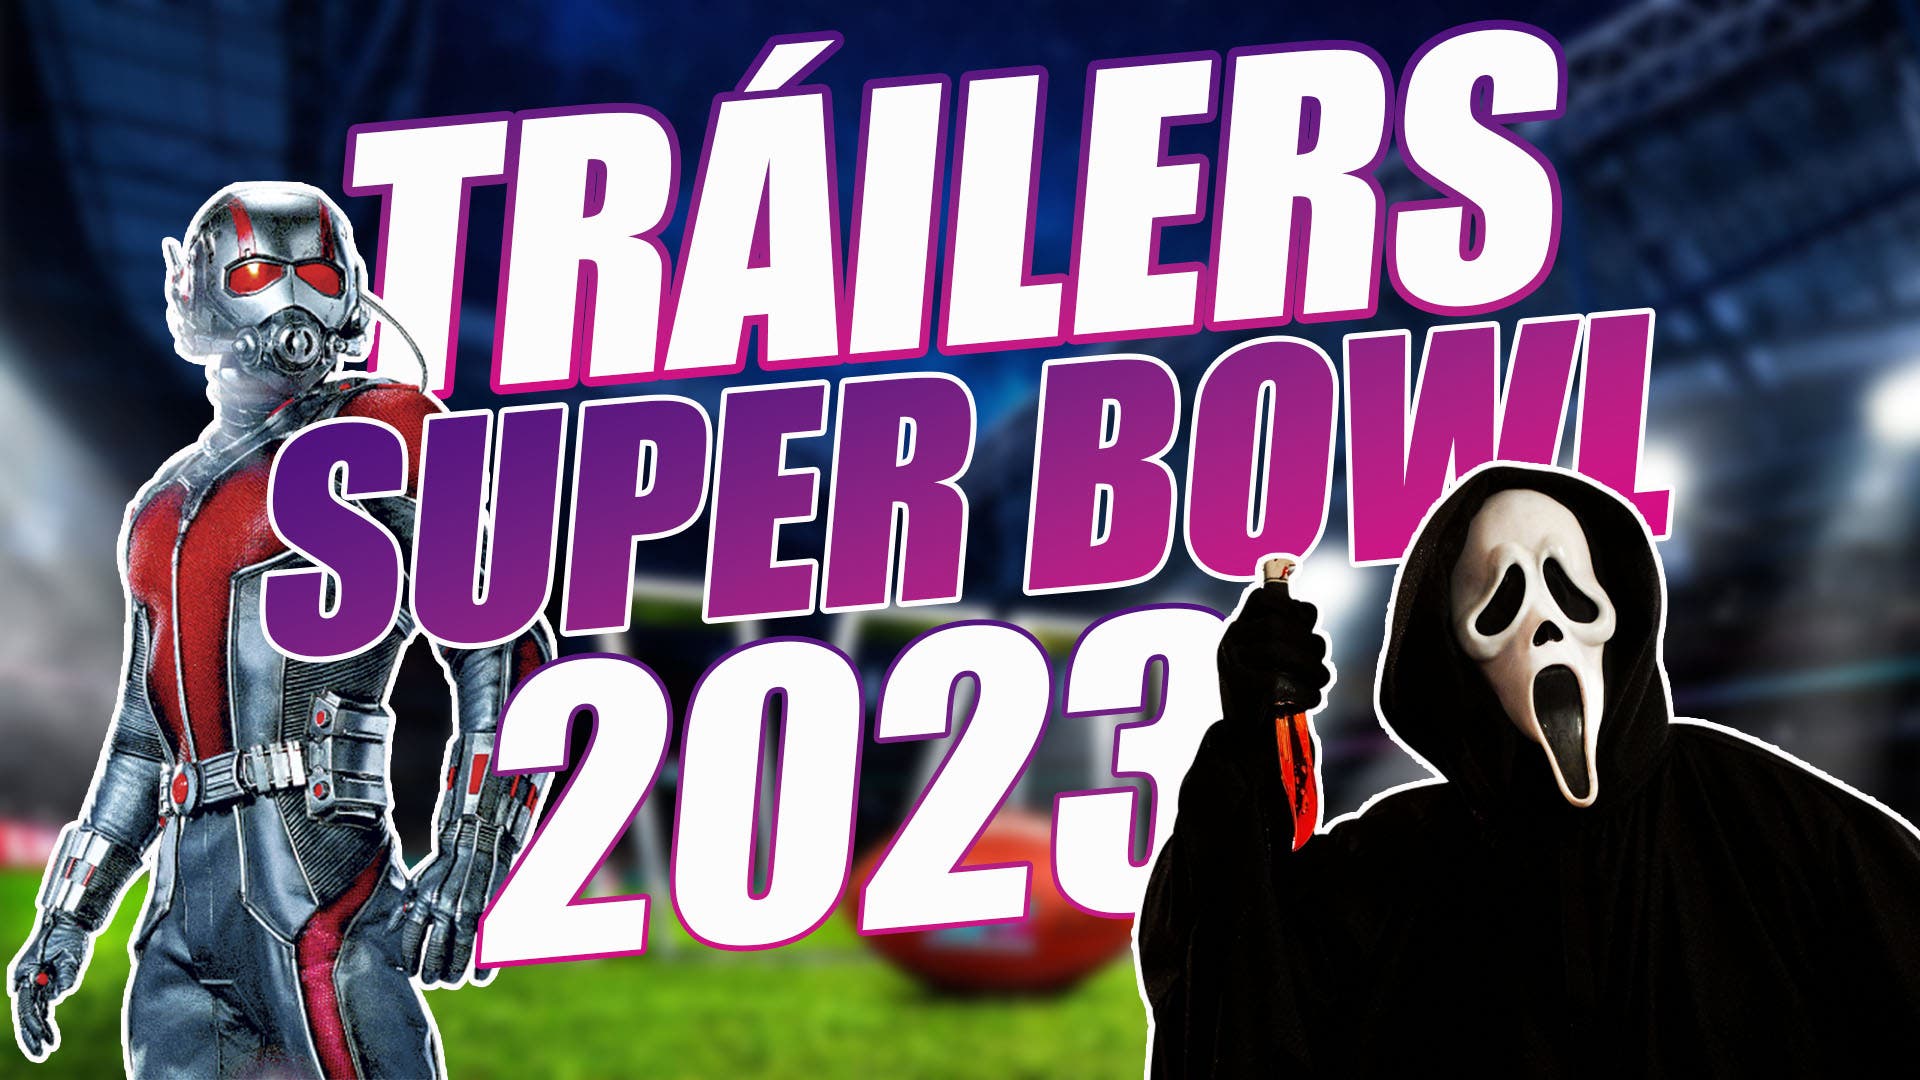 These Are The Trailers That Can Be Seen In The Super Bowl 2023 Globe